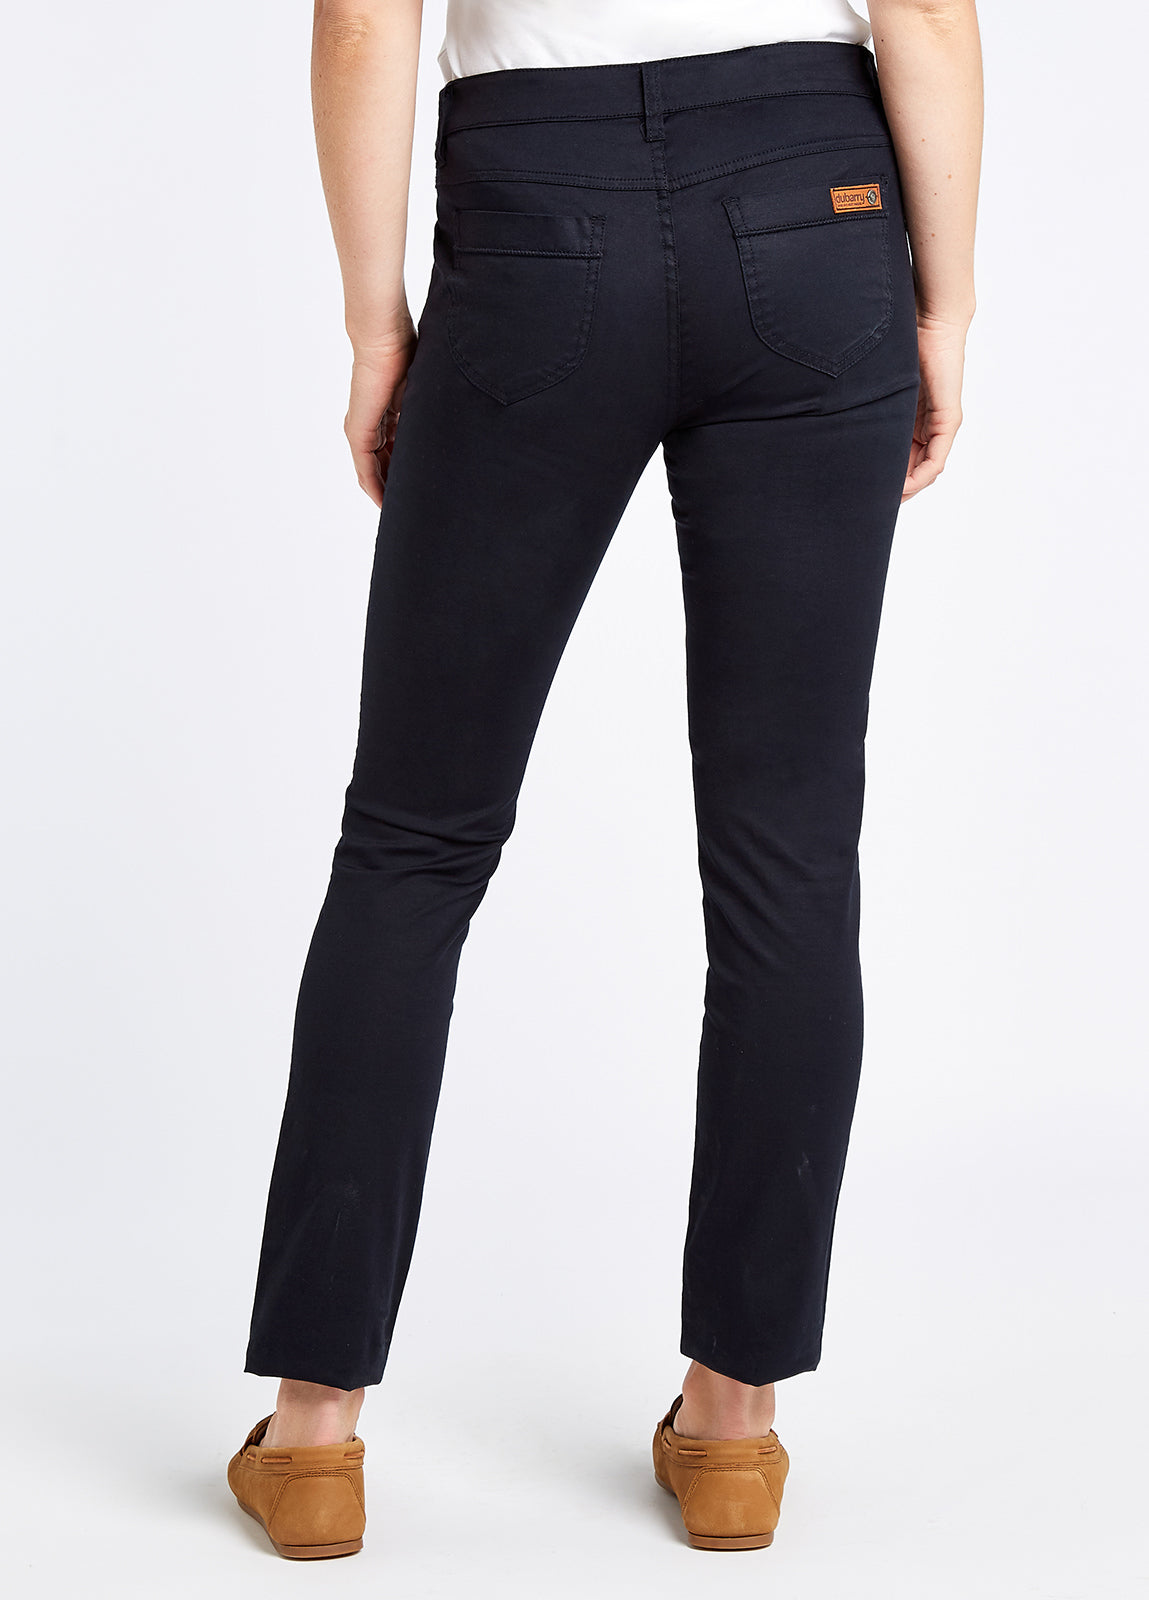 Greenway Jeans - Navy